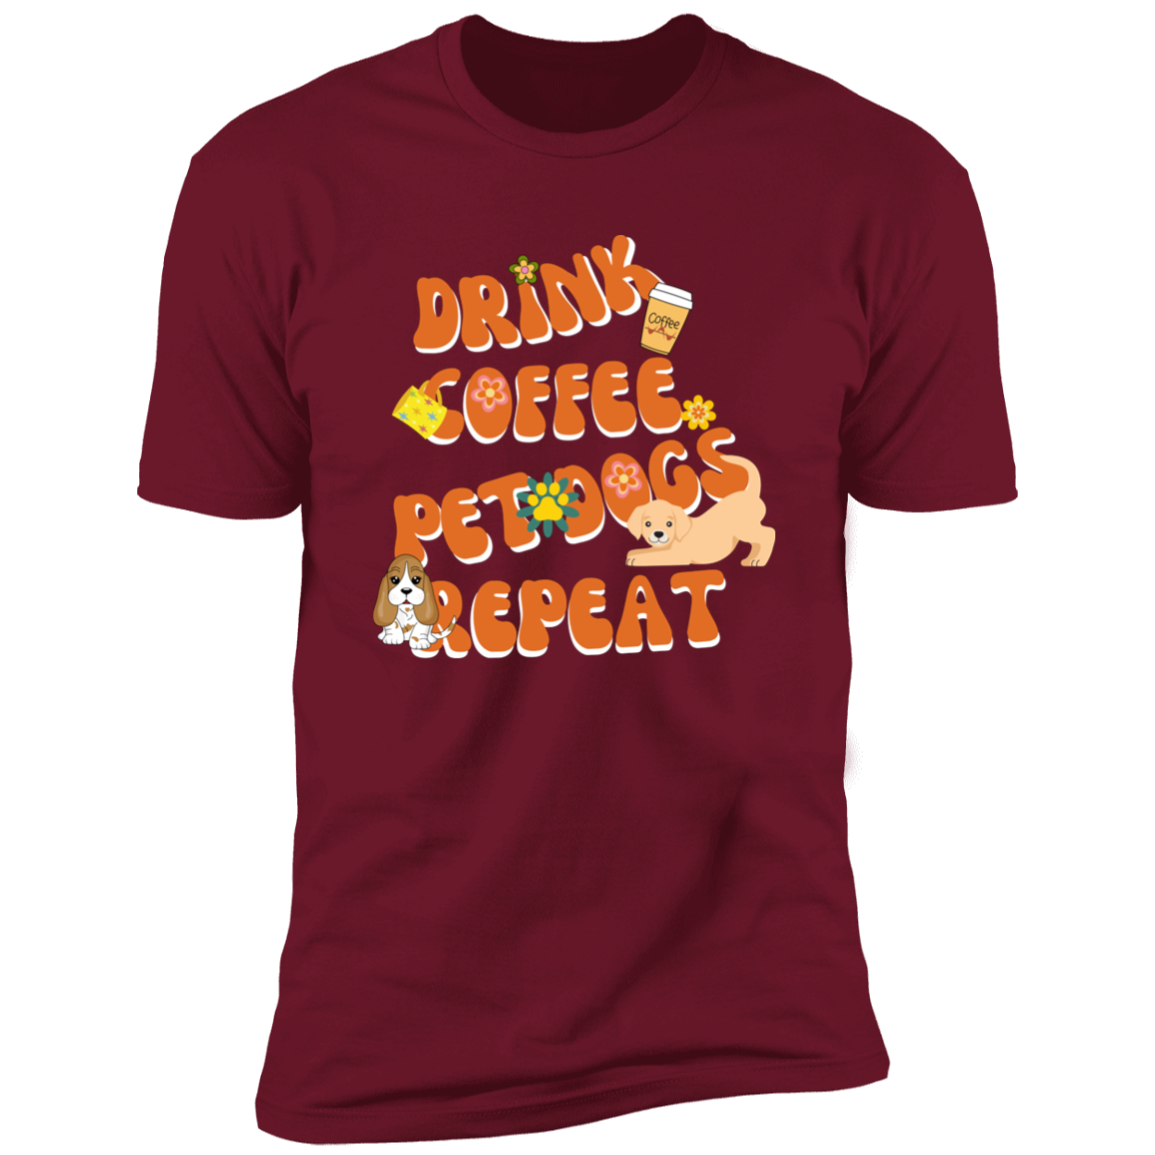 Drink Coffee Pet dogs repeat dog  Shirt, funny dog shirt for humans, dog mom and dog dad shirt, in cardinal red